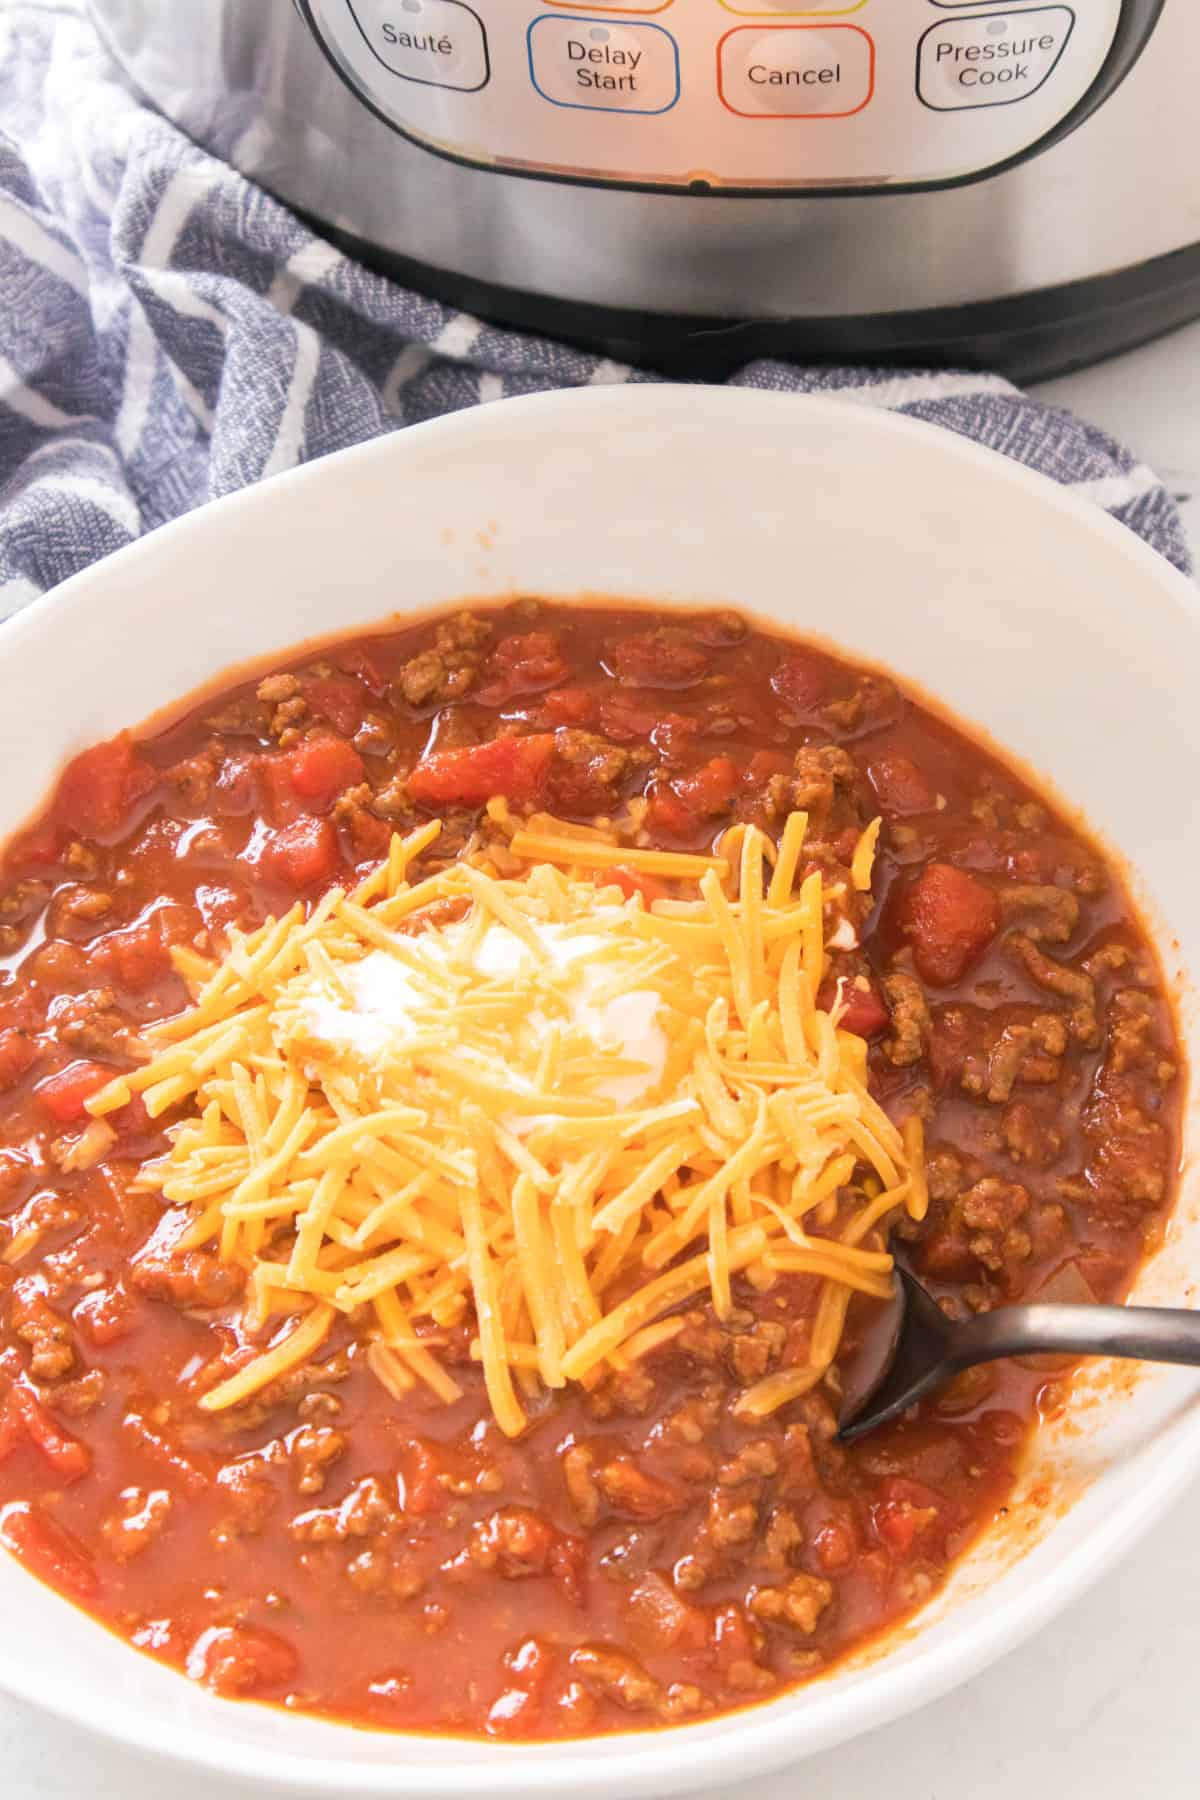 bowl of chili without beans topped with shredded cheddar cheese.